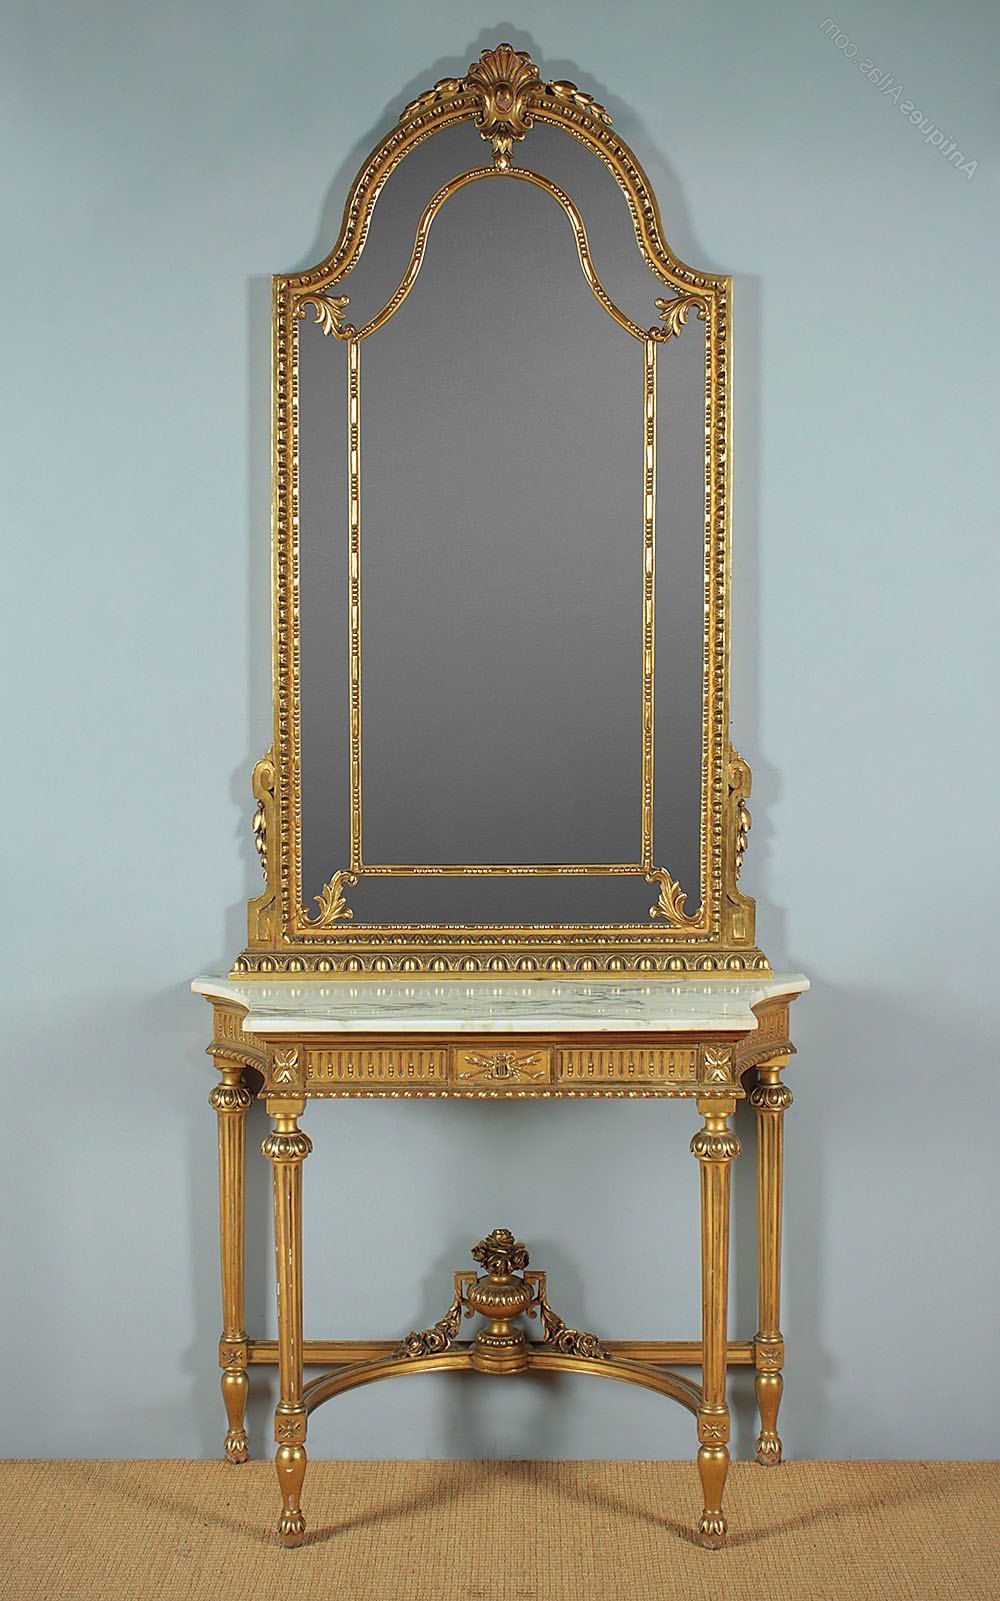 Best And Newest Edwardian Era Marble Top Console Table & Mirror Pertaining To Antique Mirror Console Tables (View 3 of 10)